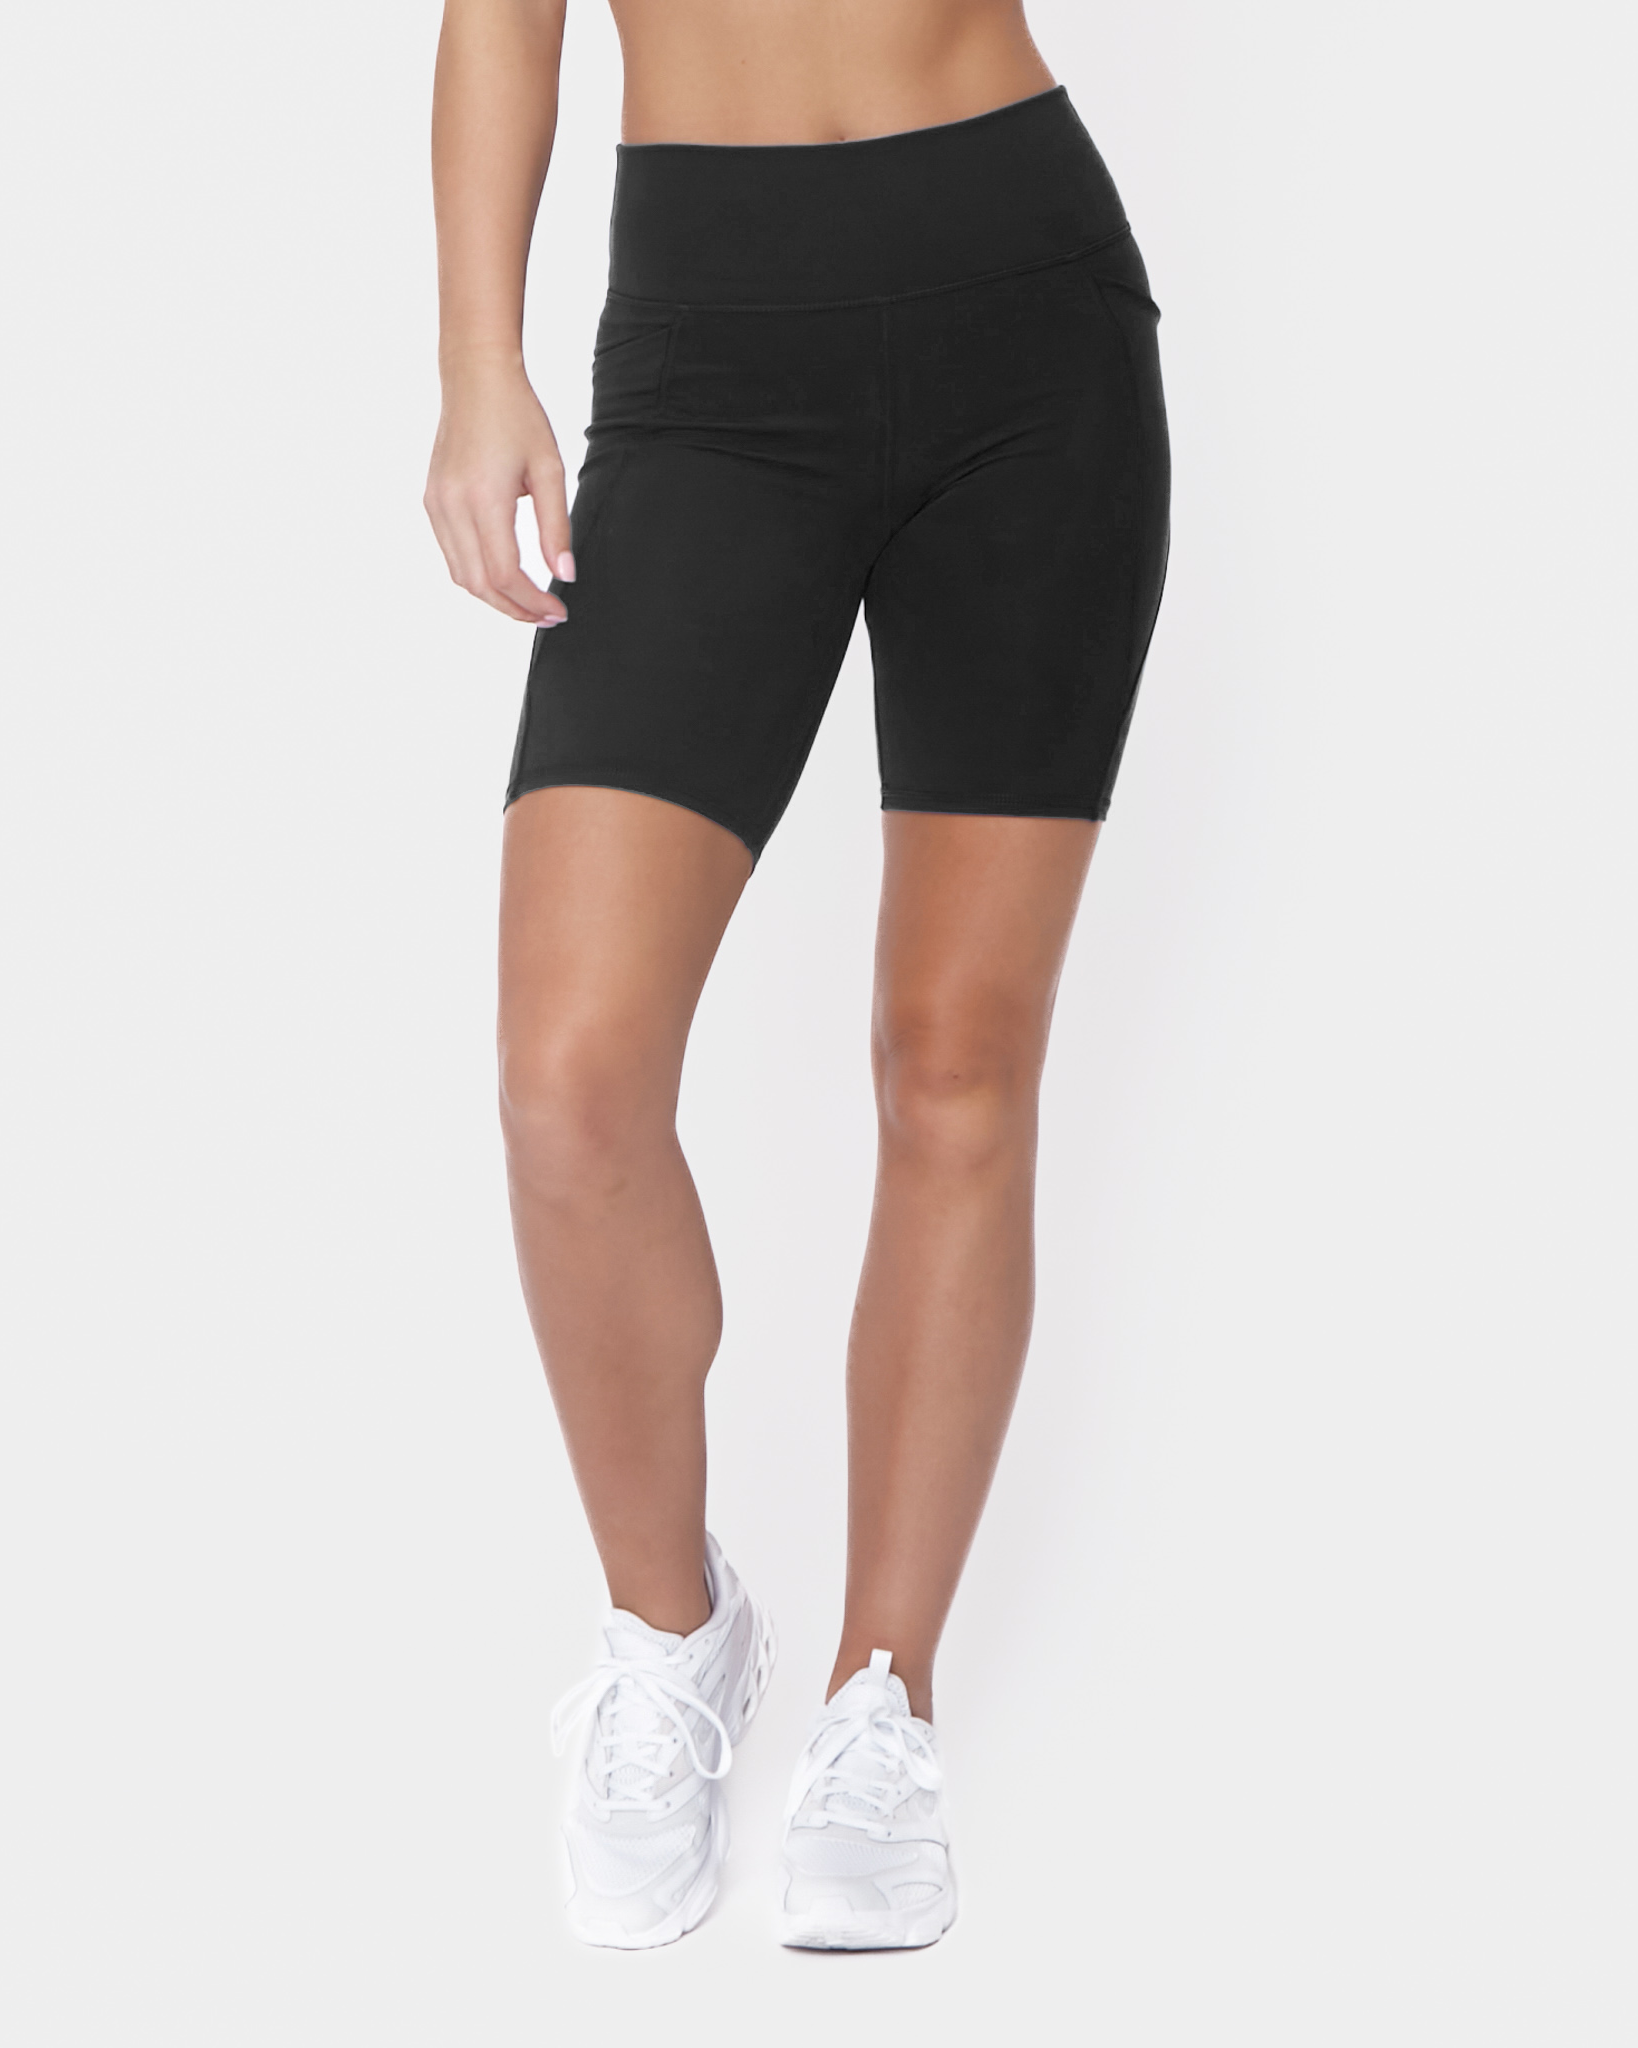 Buy Stunning Collection Black Shorts/Under Dress Shorts/Under Skirt Shorts  for Girls/Gym Shorts/Yoga Shorts/Cycling Shorts/Shorts for Dresses for  Women (5-6 Years) at